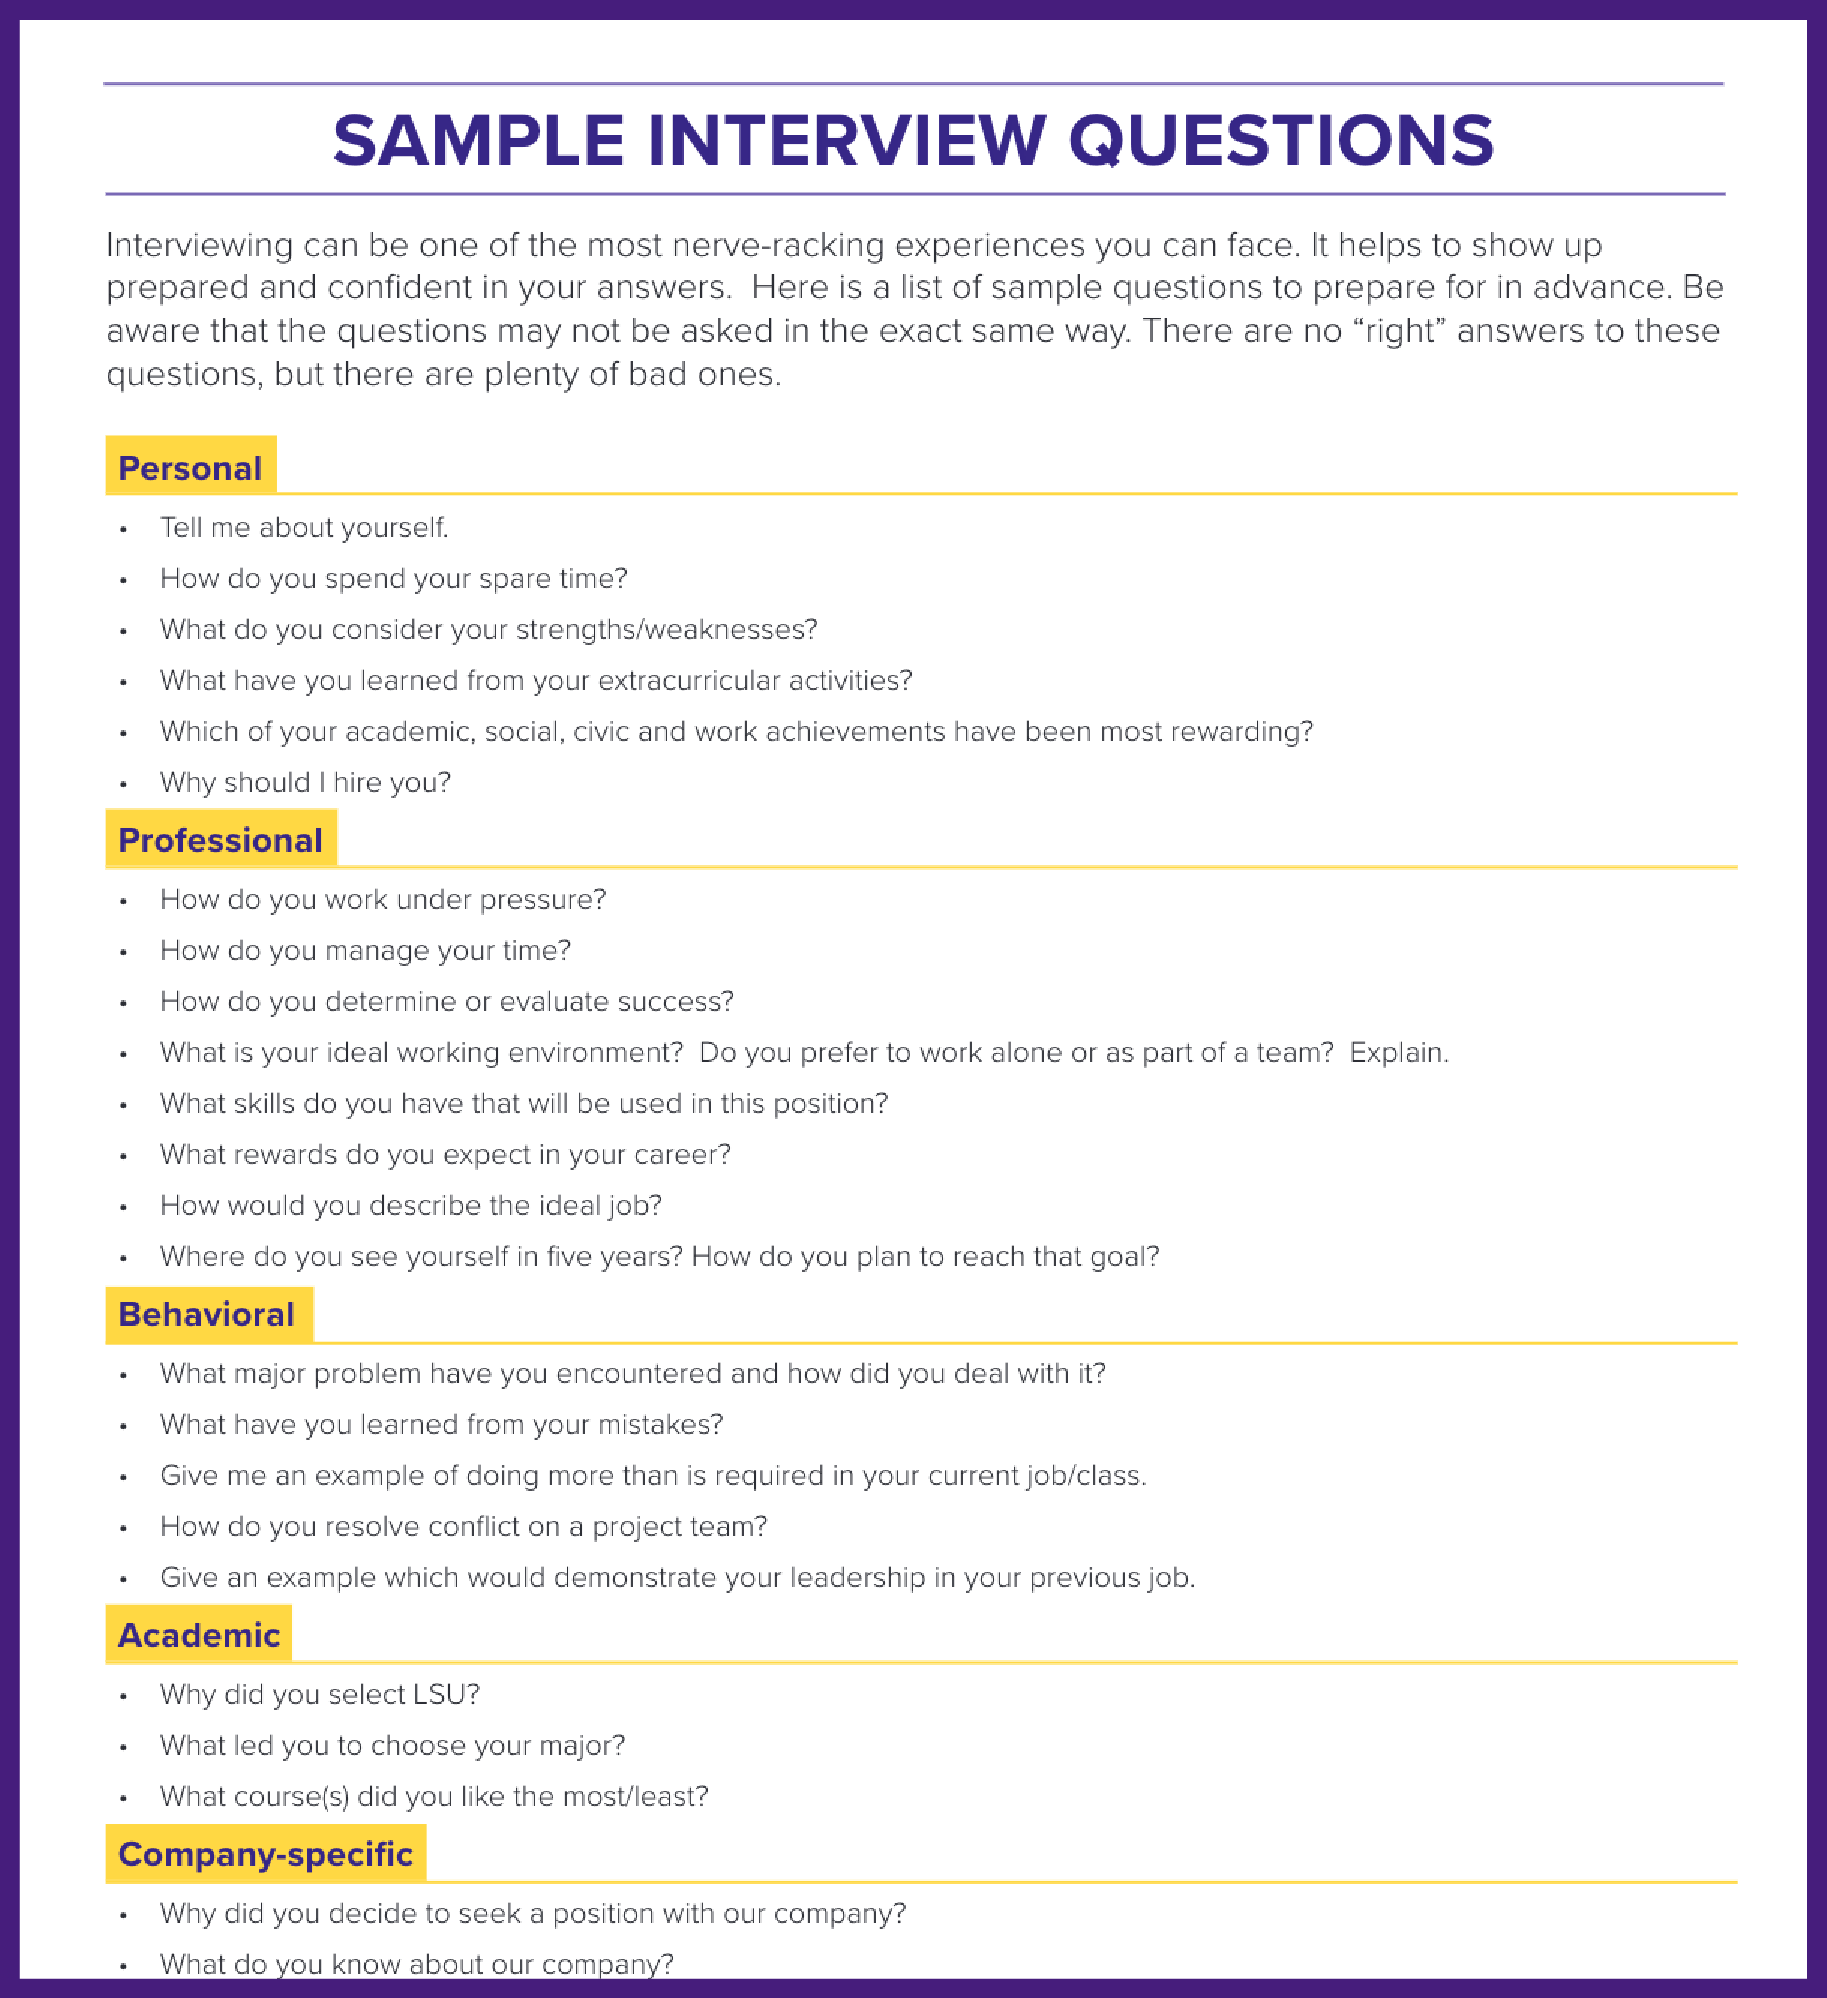 thumbnail of sample interview questions